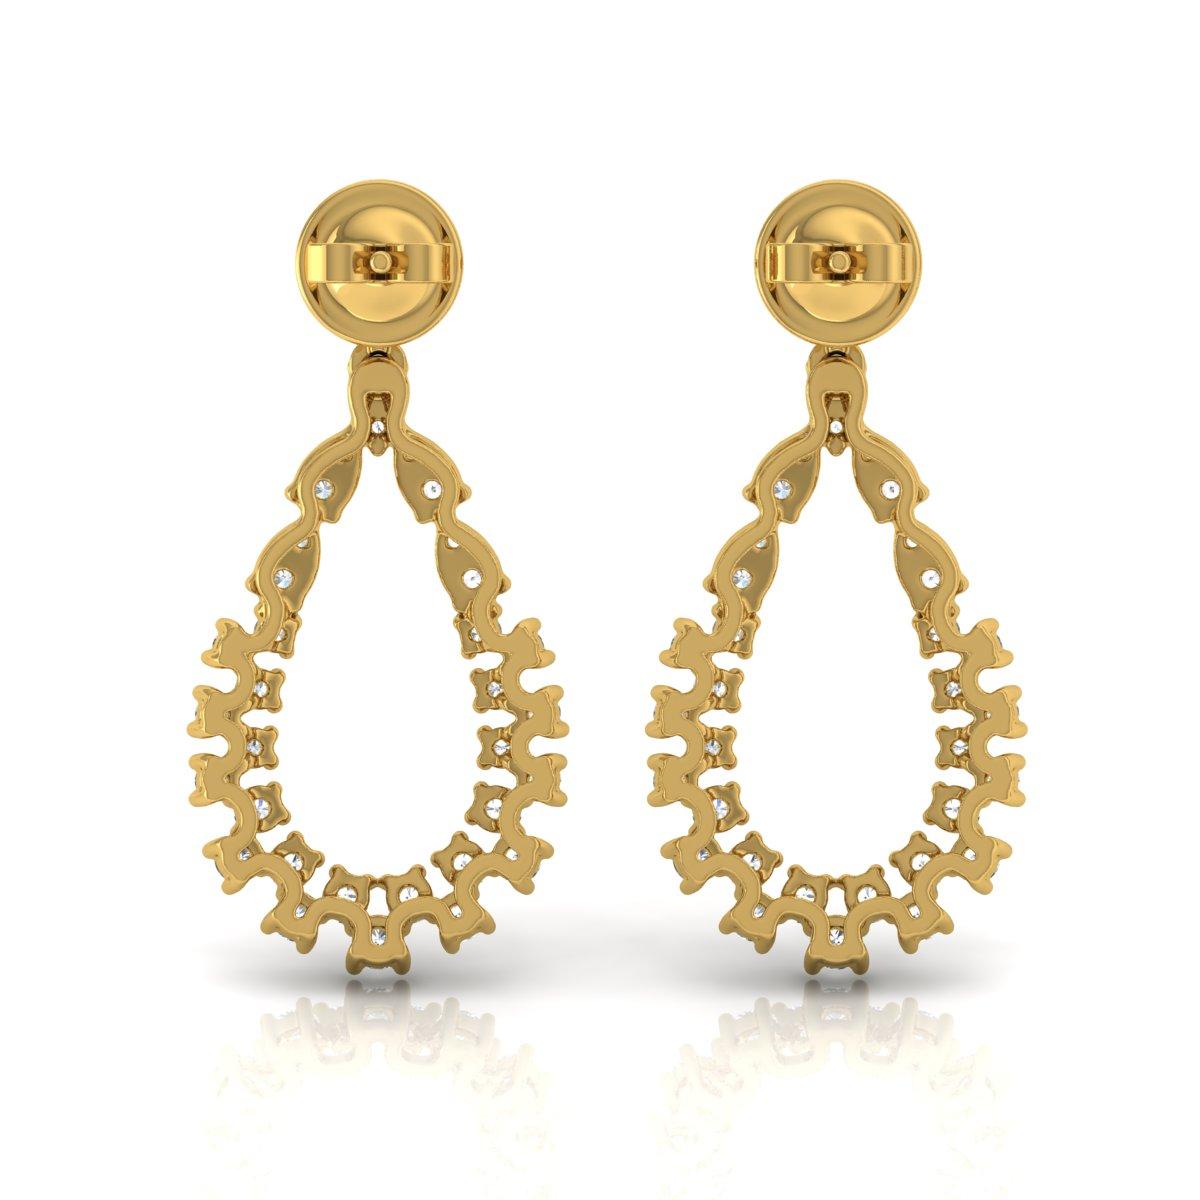 Item Code :- SFE-1065
Gross Weight :- 5.59 gm
14k Yellow Gold Weight :- 5.23 gm
Diamond Weight :- 1.82 carat ( AVERAGE DIAMOND CLARITY SI1-SI2 & COLOR H-I )
Earrings Length :- 31 mm approx.
✦ Sizing
.....................
We can adjust most items to